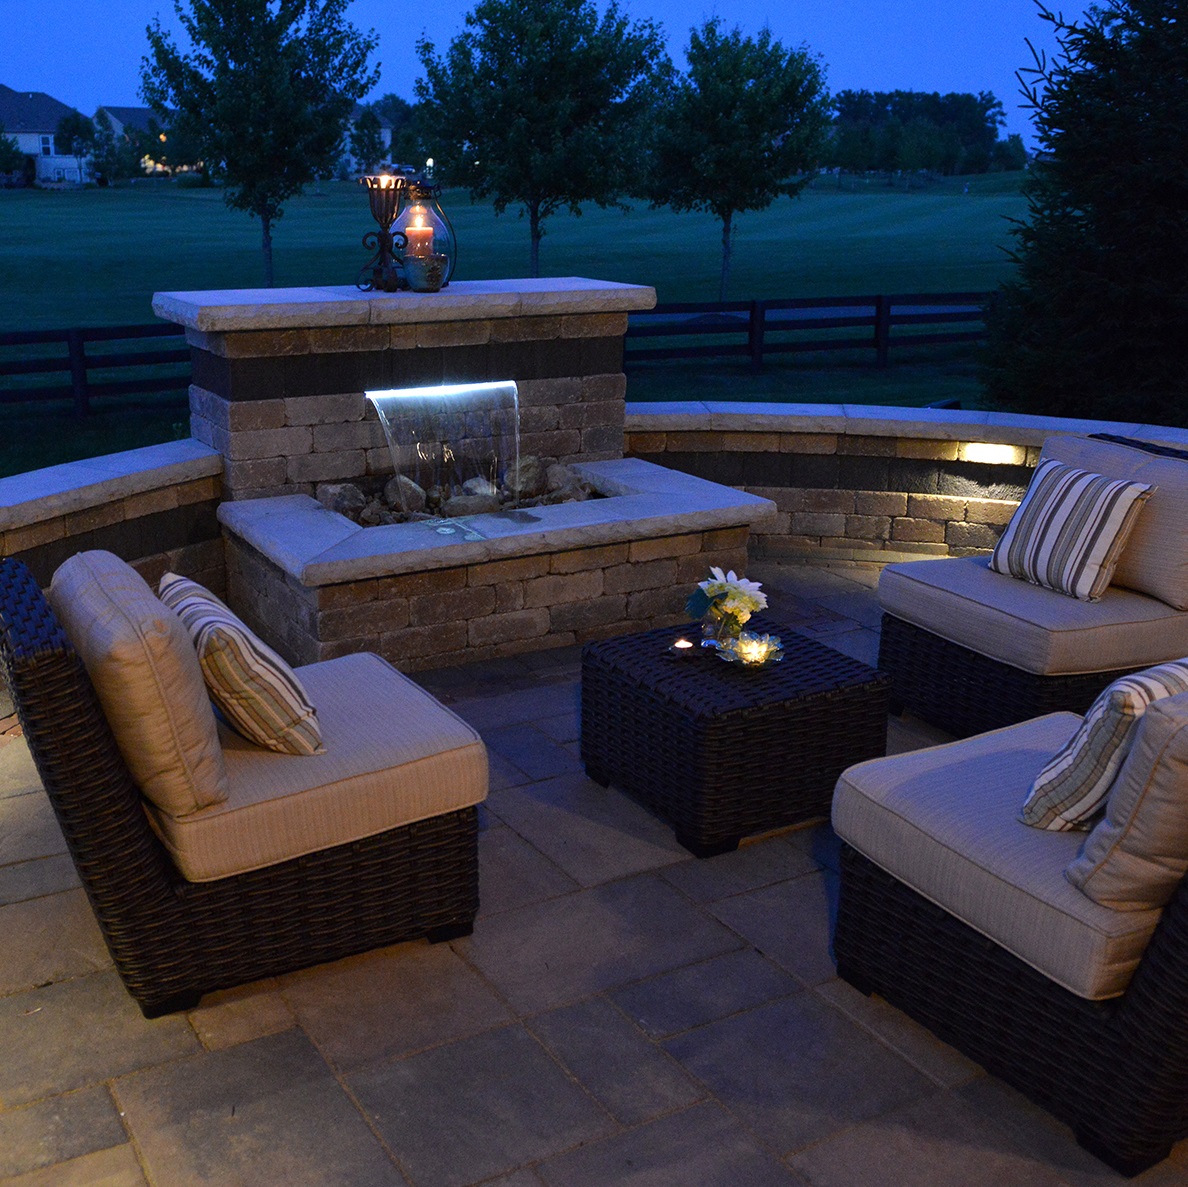 Water feature hardscape with comfy chairs and overlooking lawn.